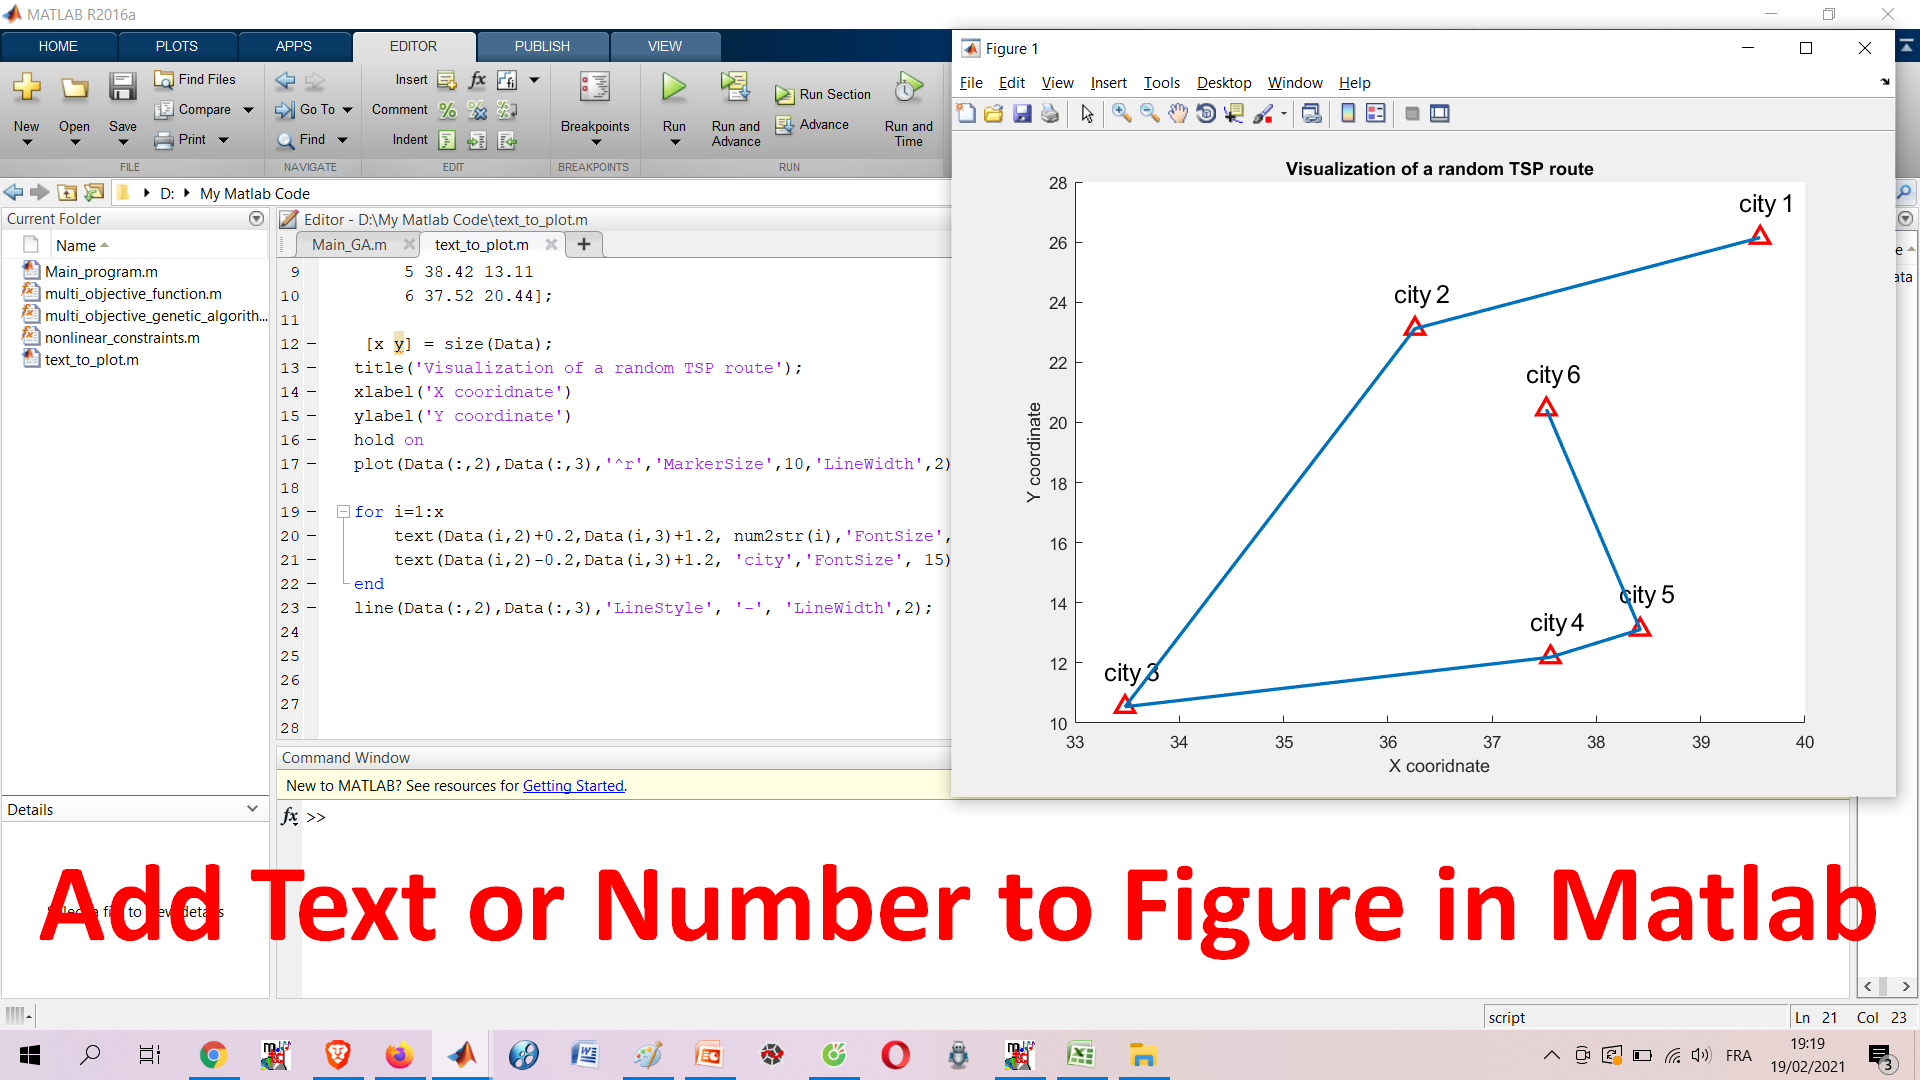 How to Add Text or Number to Figure in Matlab